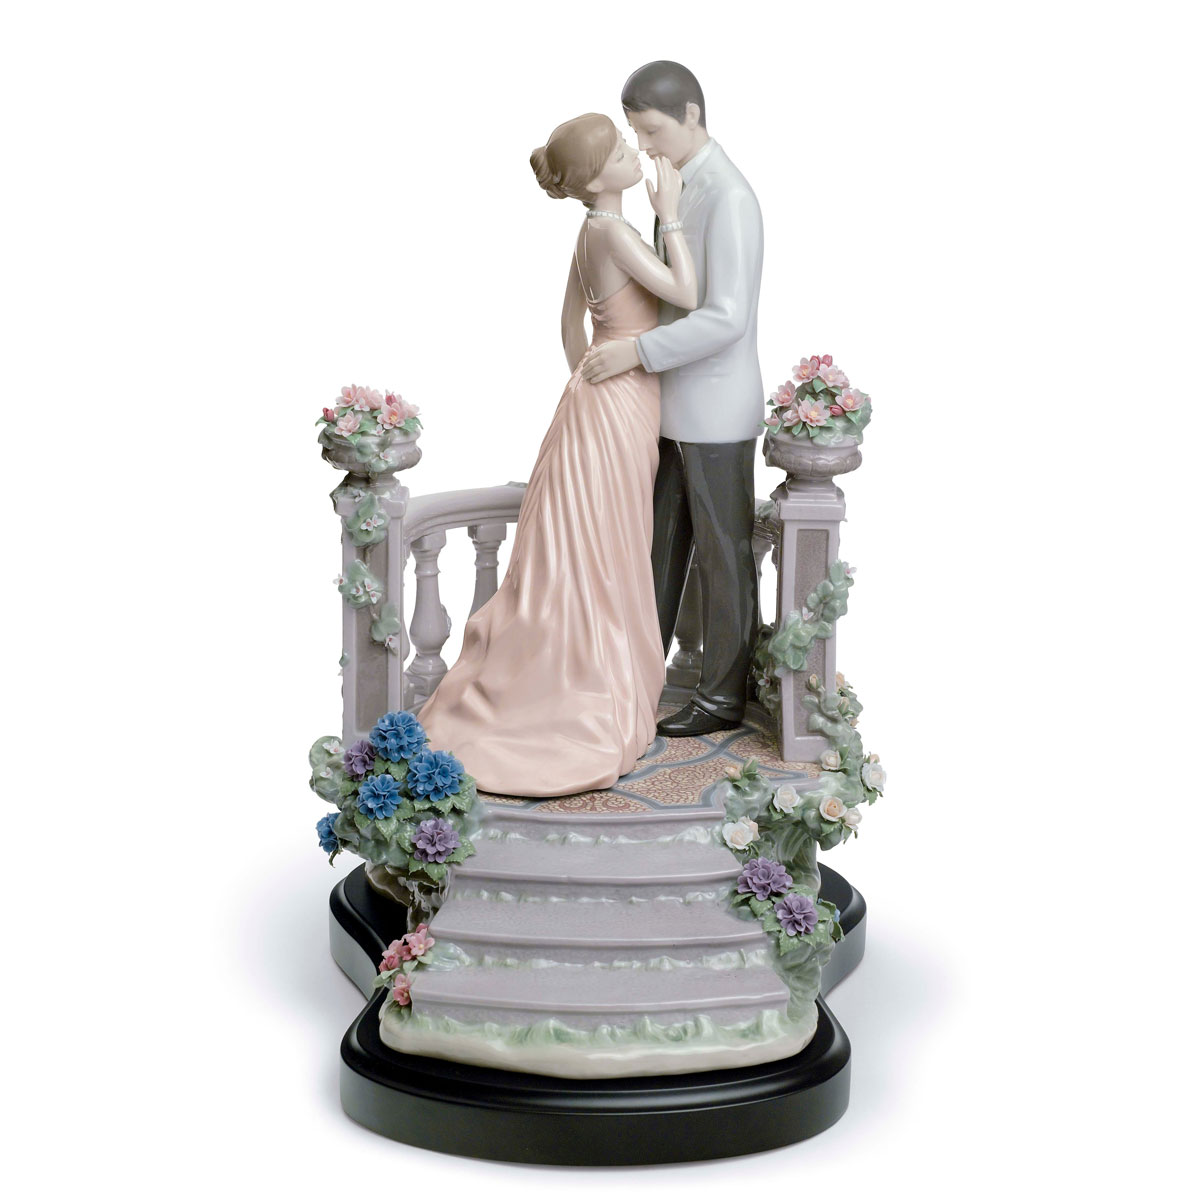 Lladro Classic Sculpture, Moonlight Love Couple Figurine. Limited Edition